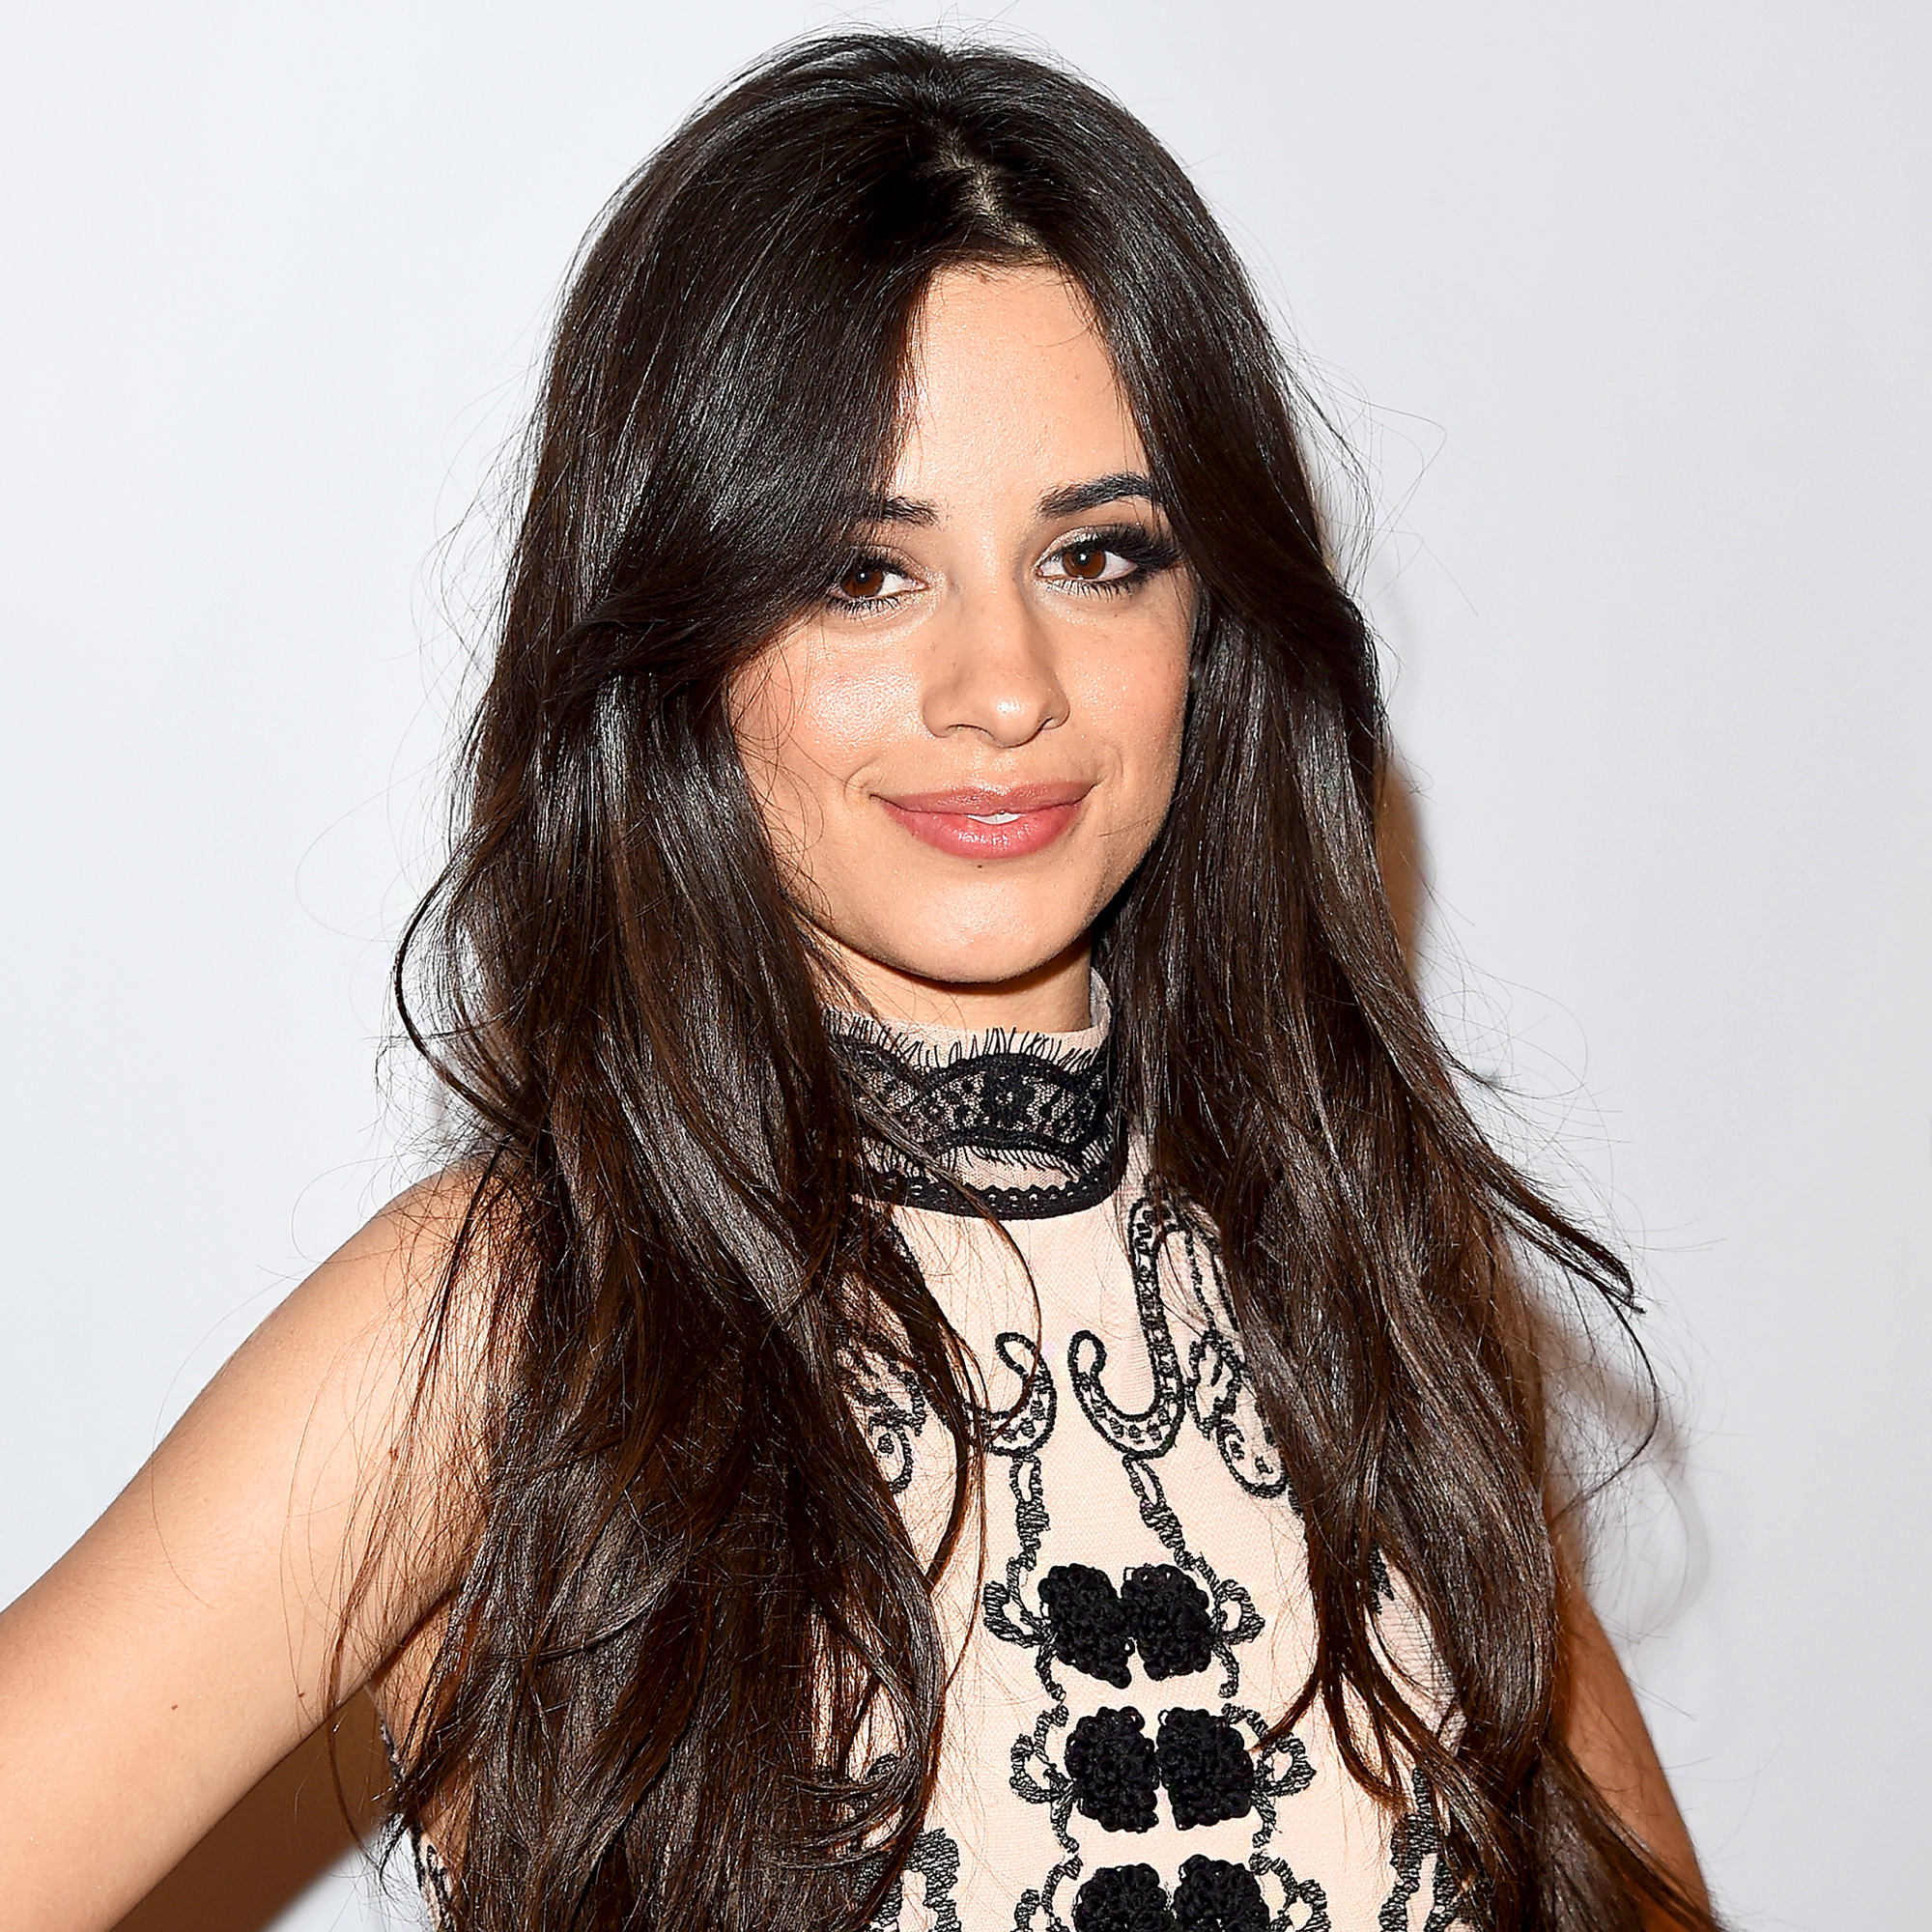 Camila Cabello Swims Away From 5H Drama in Mermaid Tail: Reactions